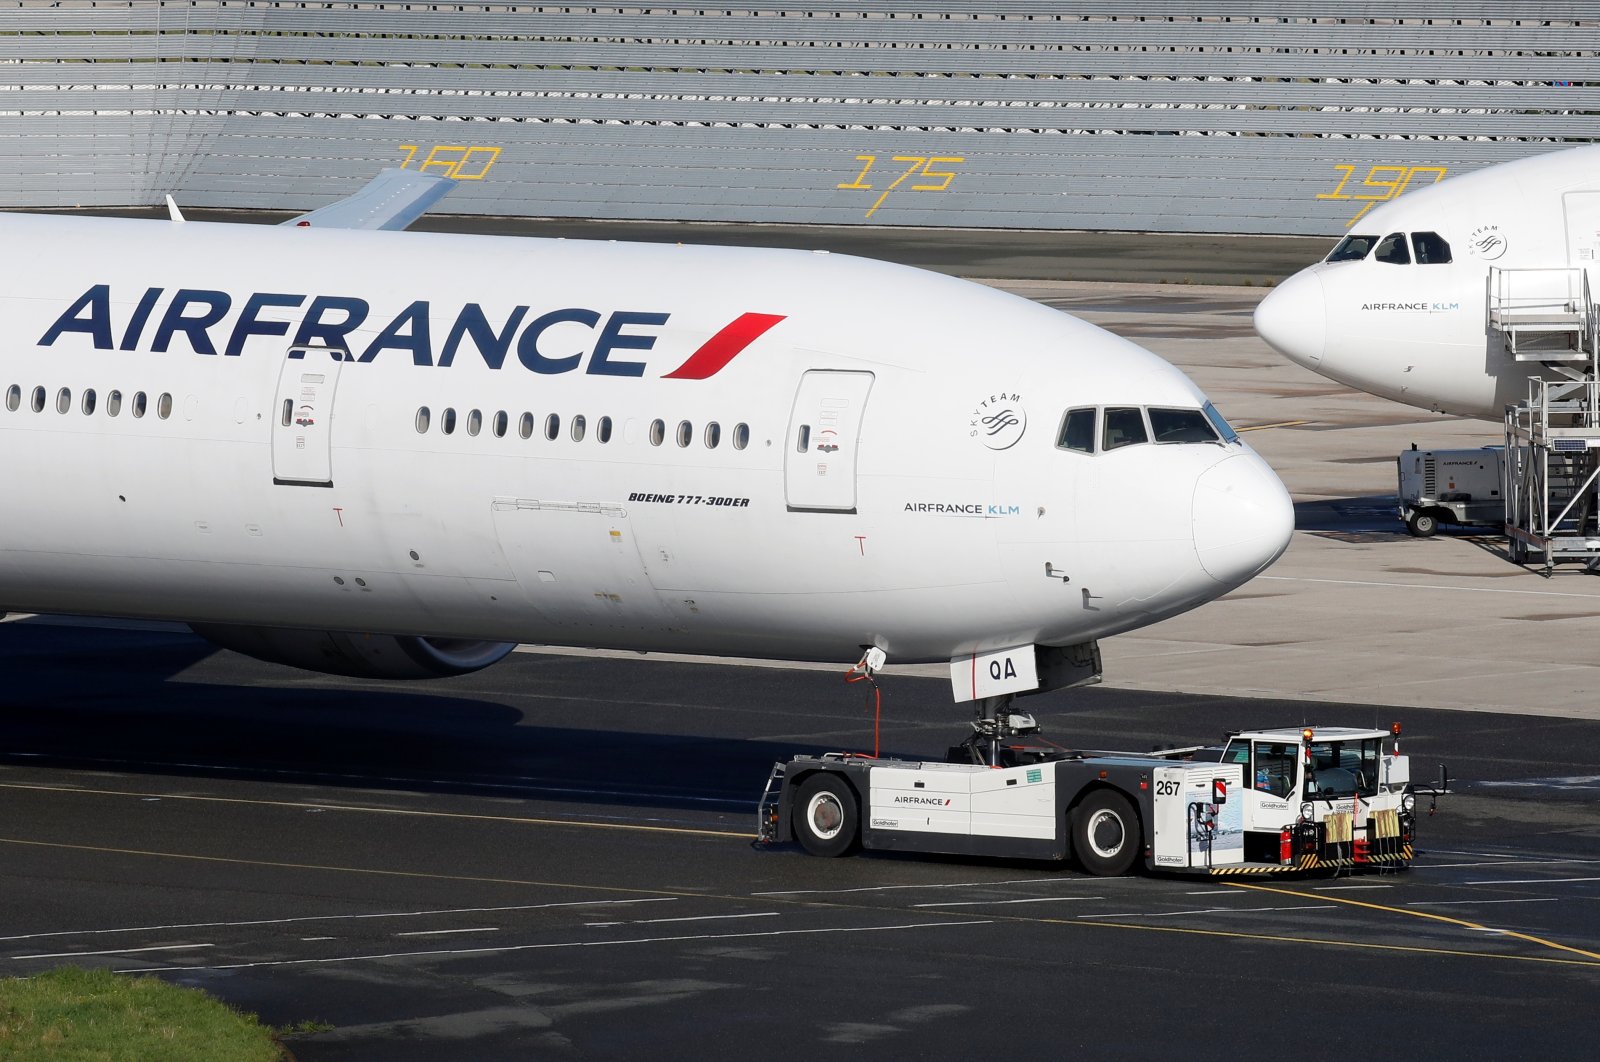 An Air France Boeing 777-300 airplane is seen on the tarmac at Paris Charles de Gaulle airport in Roissy near Paris, France, Sept. 29, 2021. (Reuters Photo)